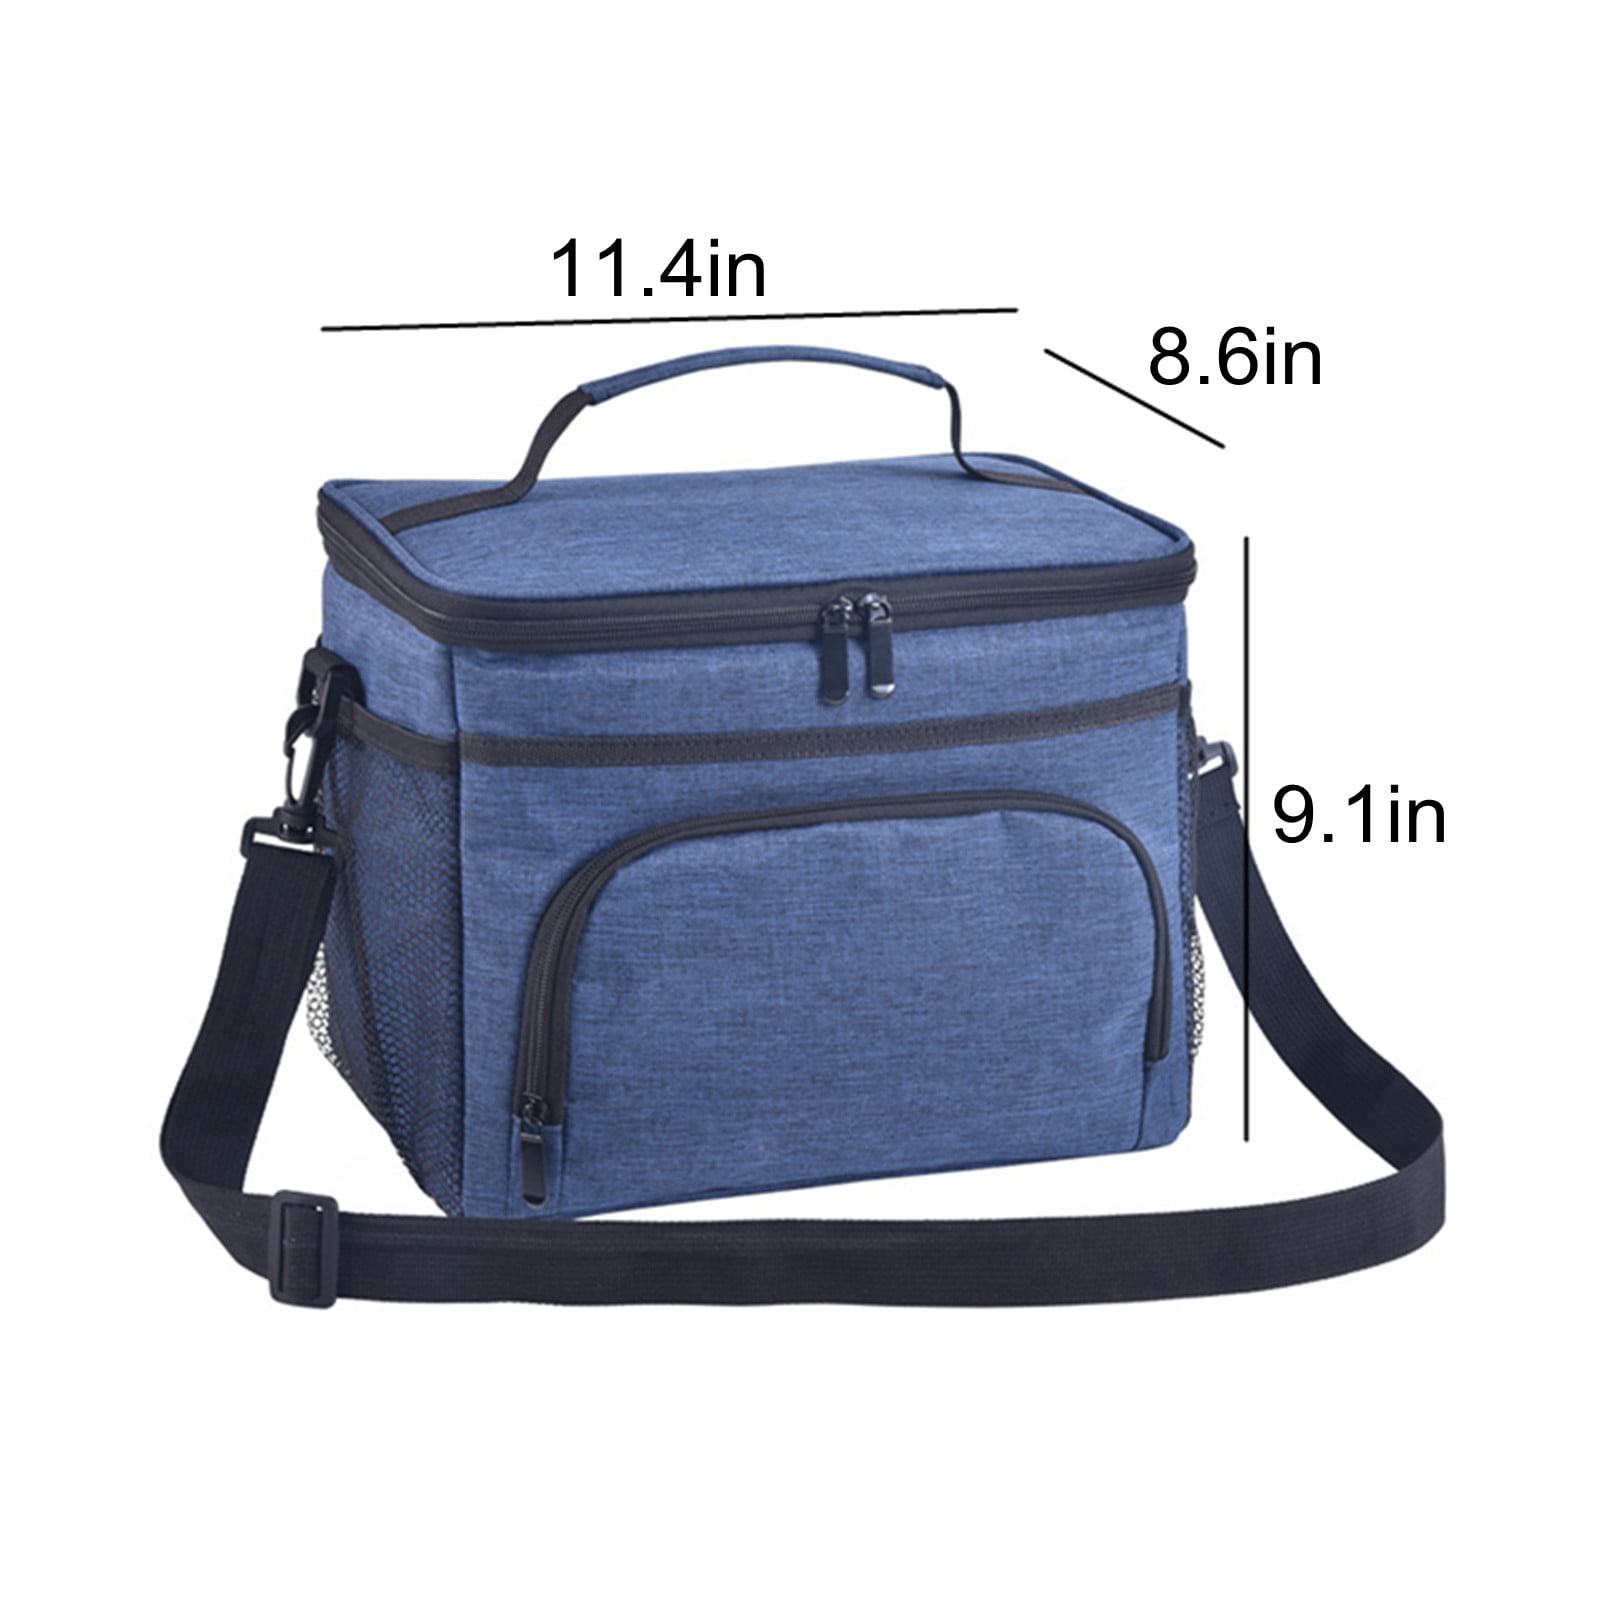 Insulated Cooler Bag - Portable Soft Sided Cooler Multifunction